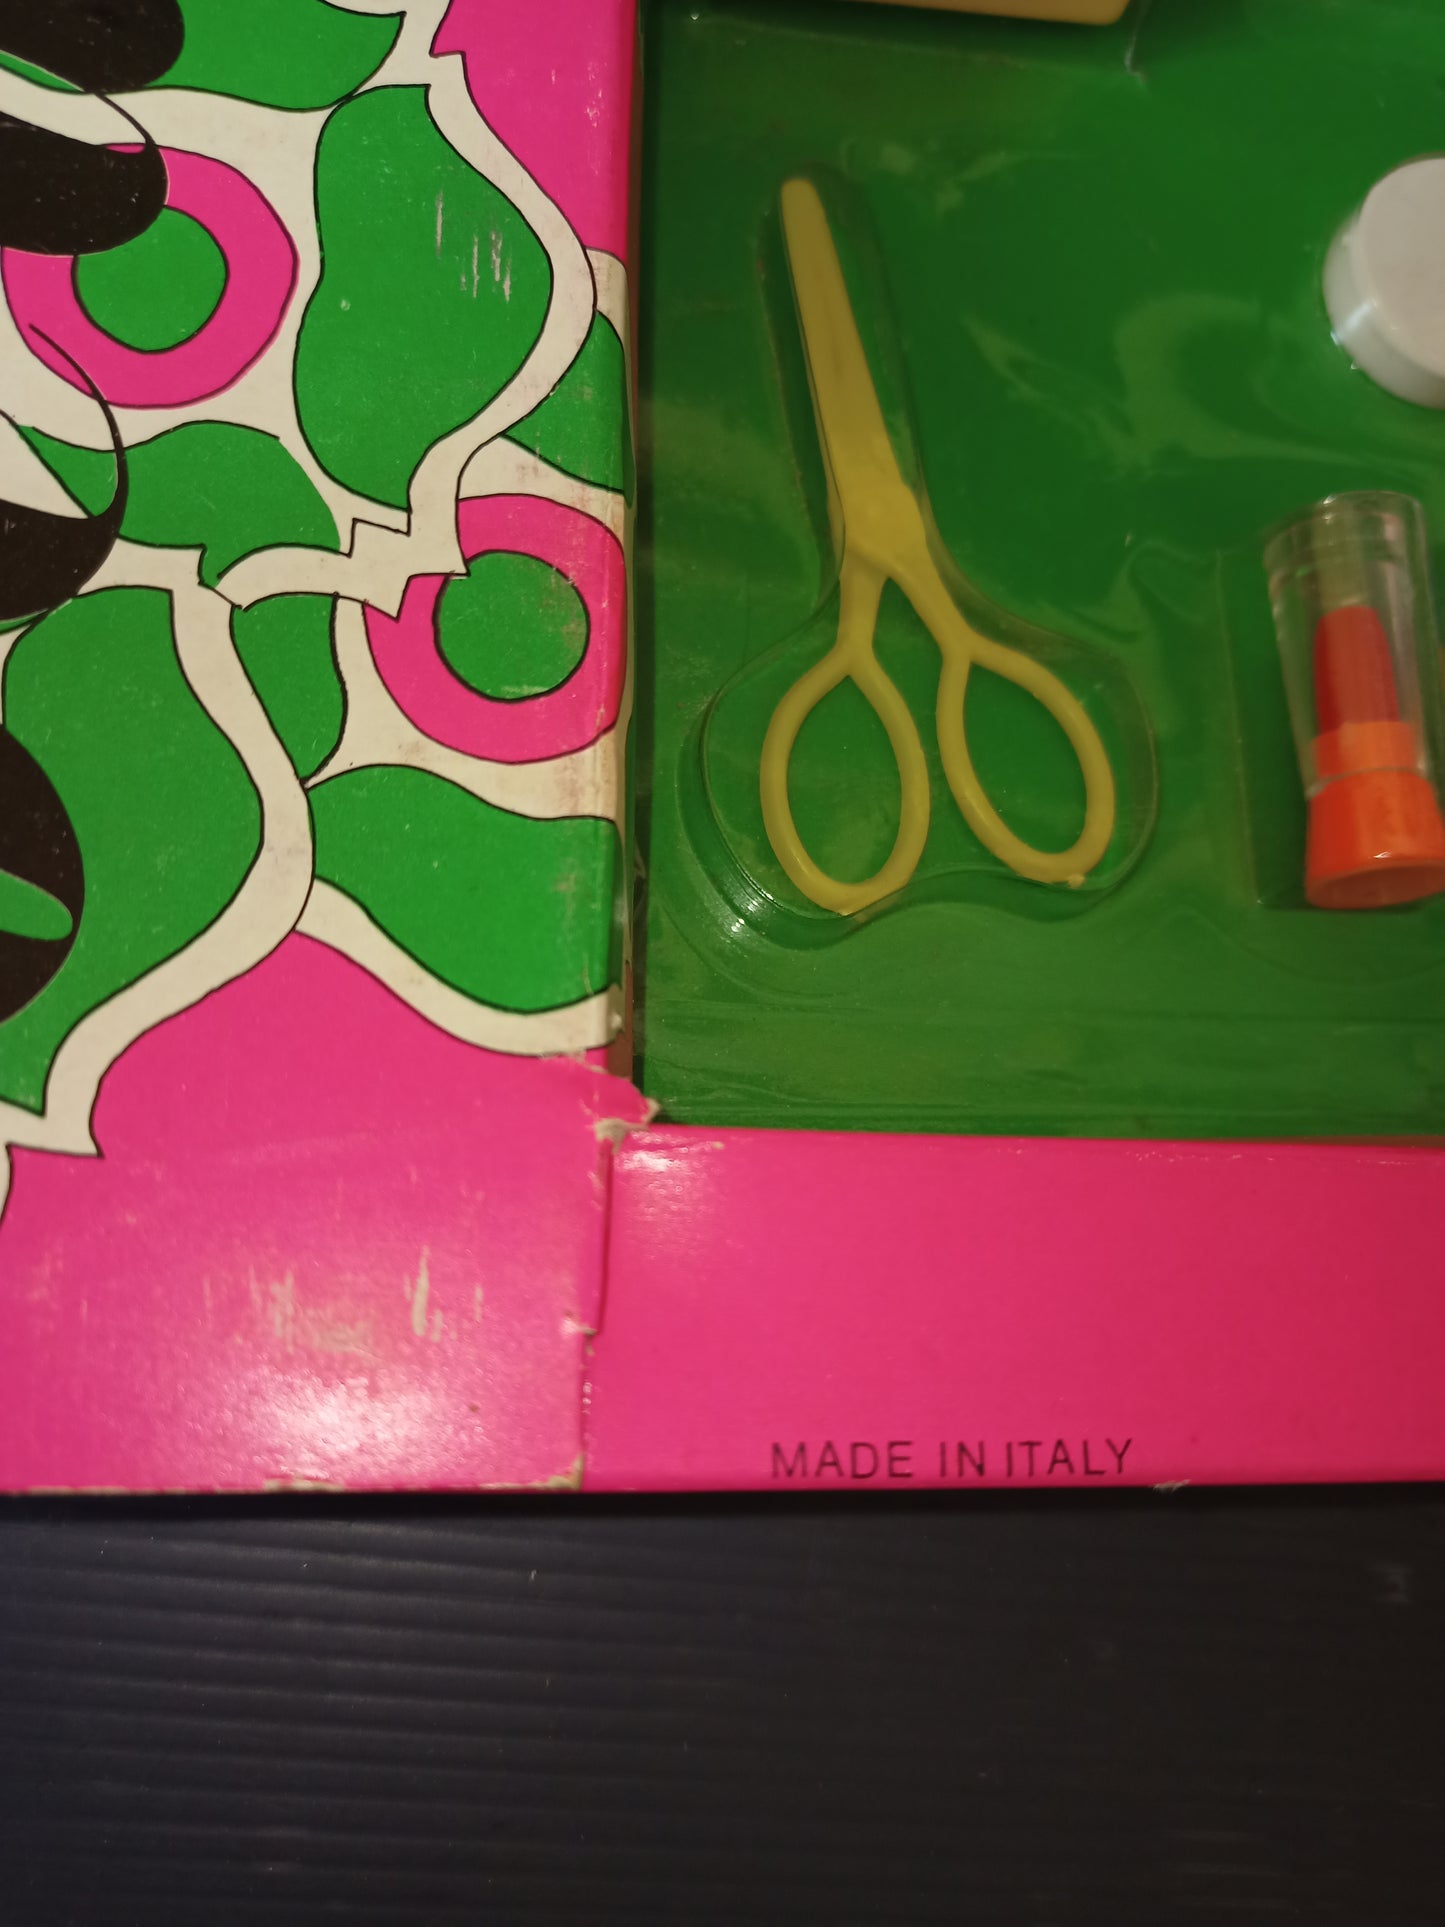 Beauty dolls game for girls, beauty accessories, original from the 70s